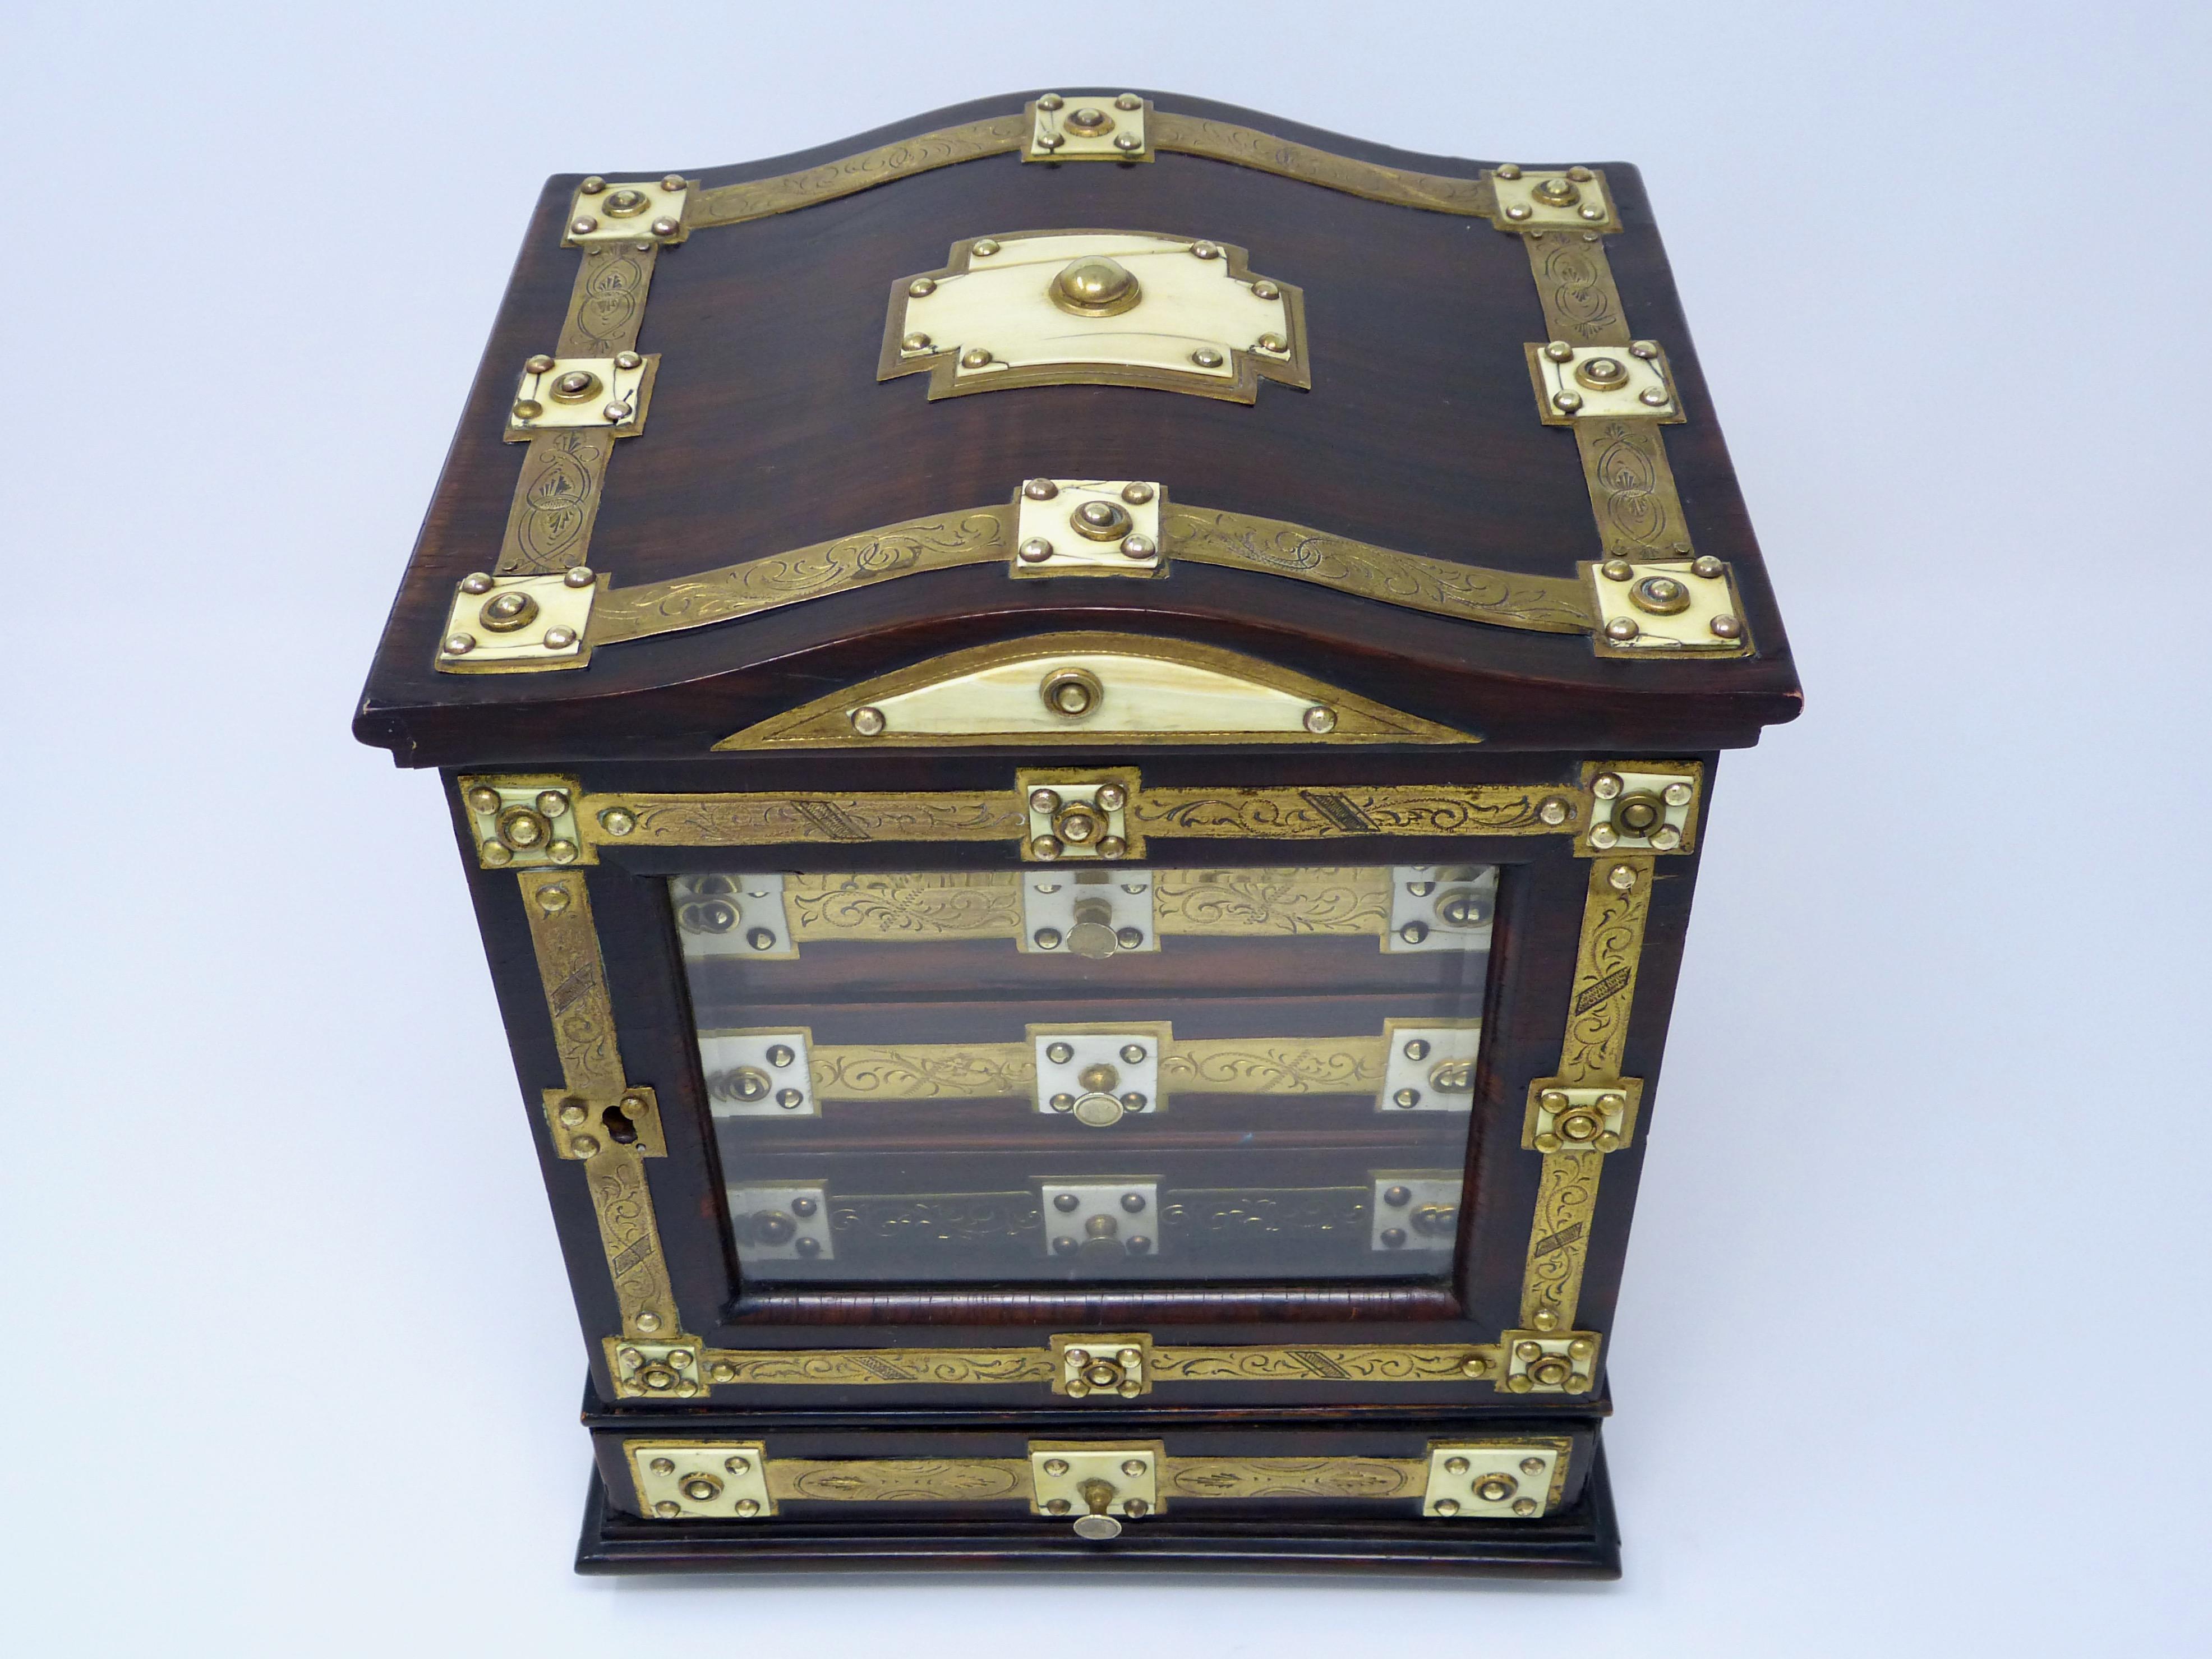 Antique wood, bronze and ivory jewelry box
Made in England in 1890s
Comes with original working key
Has some minor losses and torn fabric inside of one of the drawers.